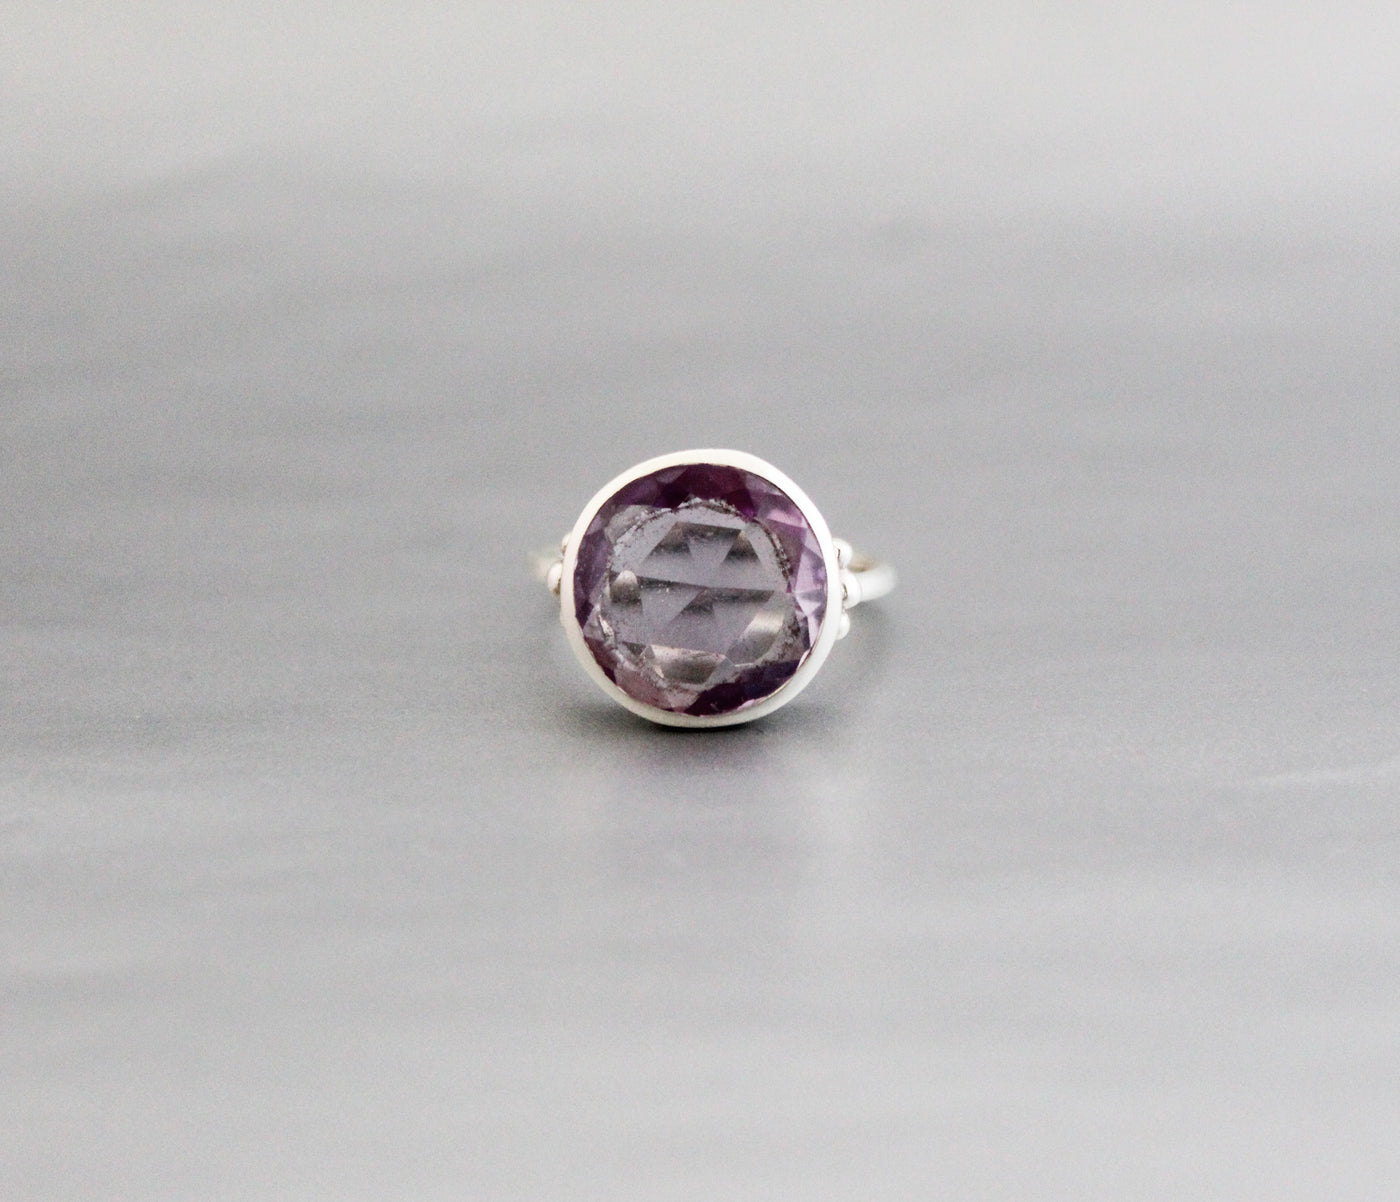 Purple Amethyst Ring, 925 Silver Ring, Middle Finger Ring, Anniversary Gift, Dainty ring, Minimalist ring, Delicate ring, Stacking ring